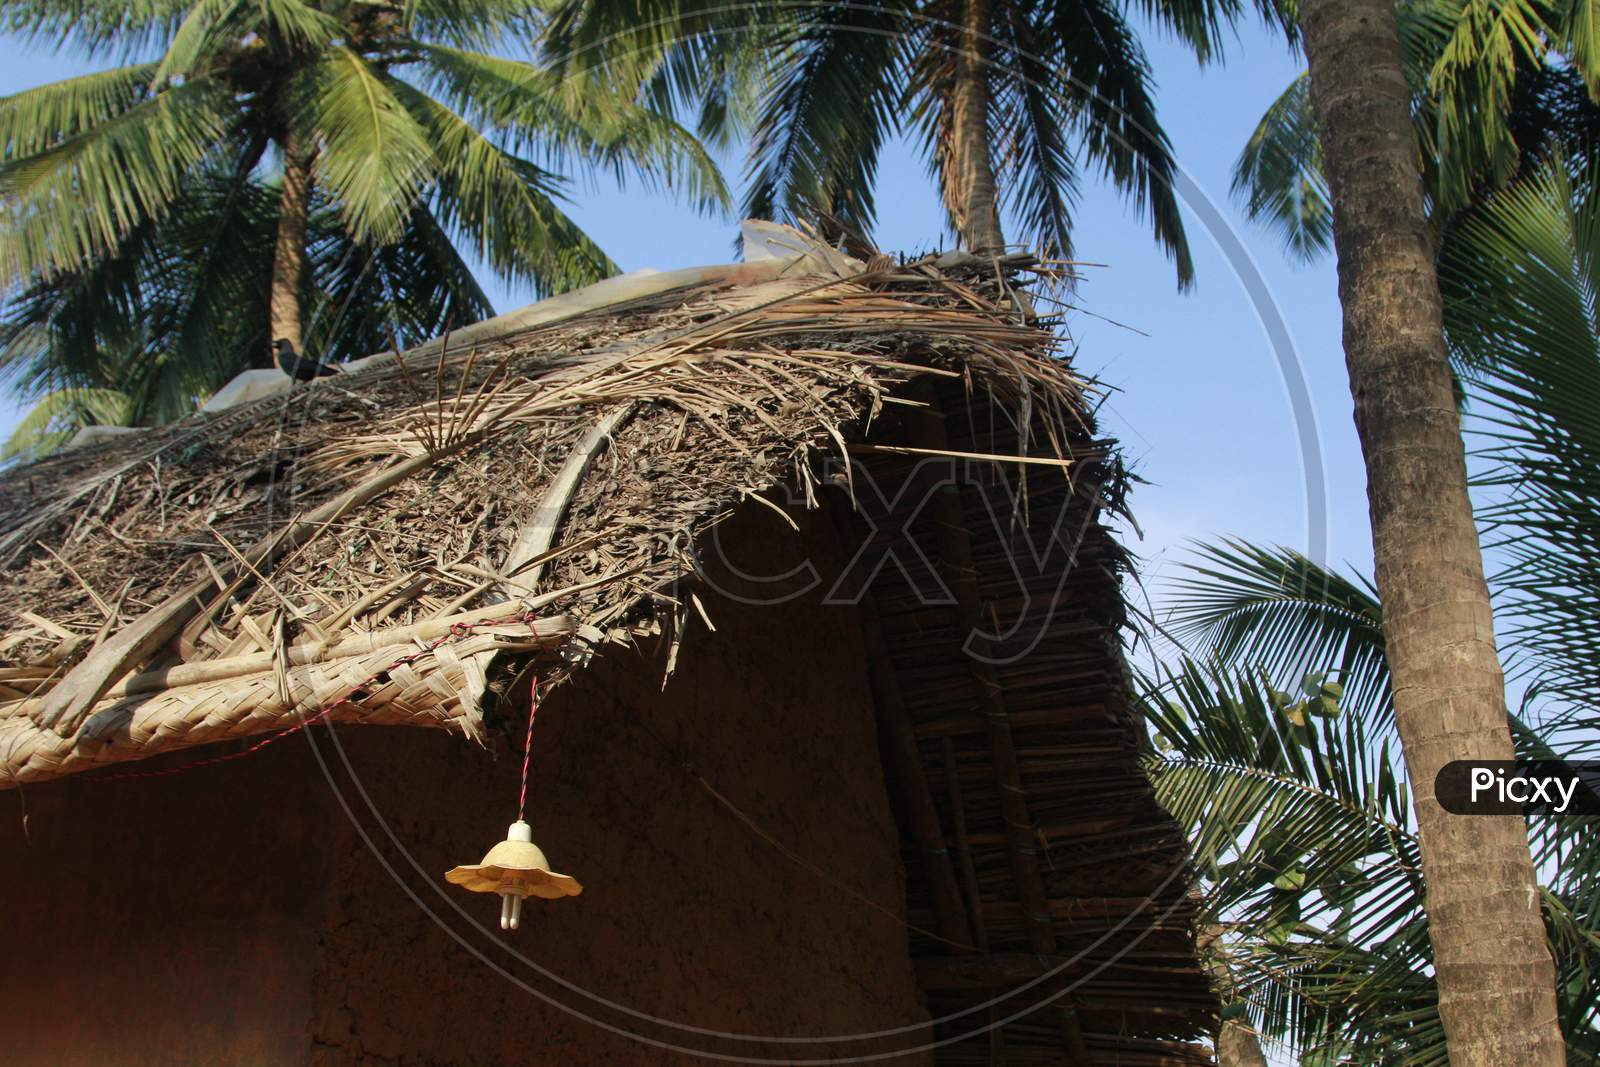 Thatched roof of the house in Goa